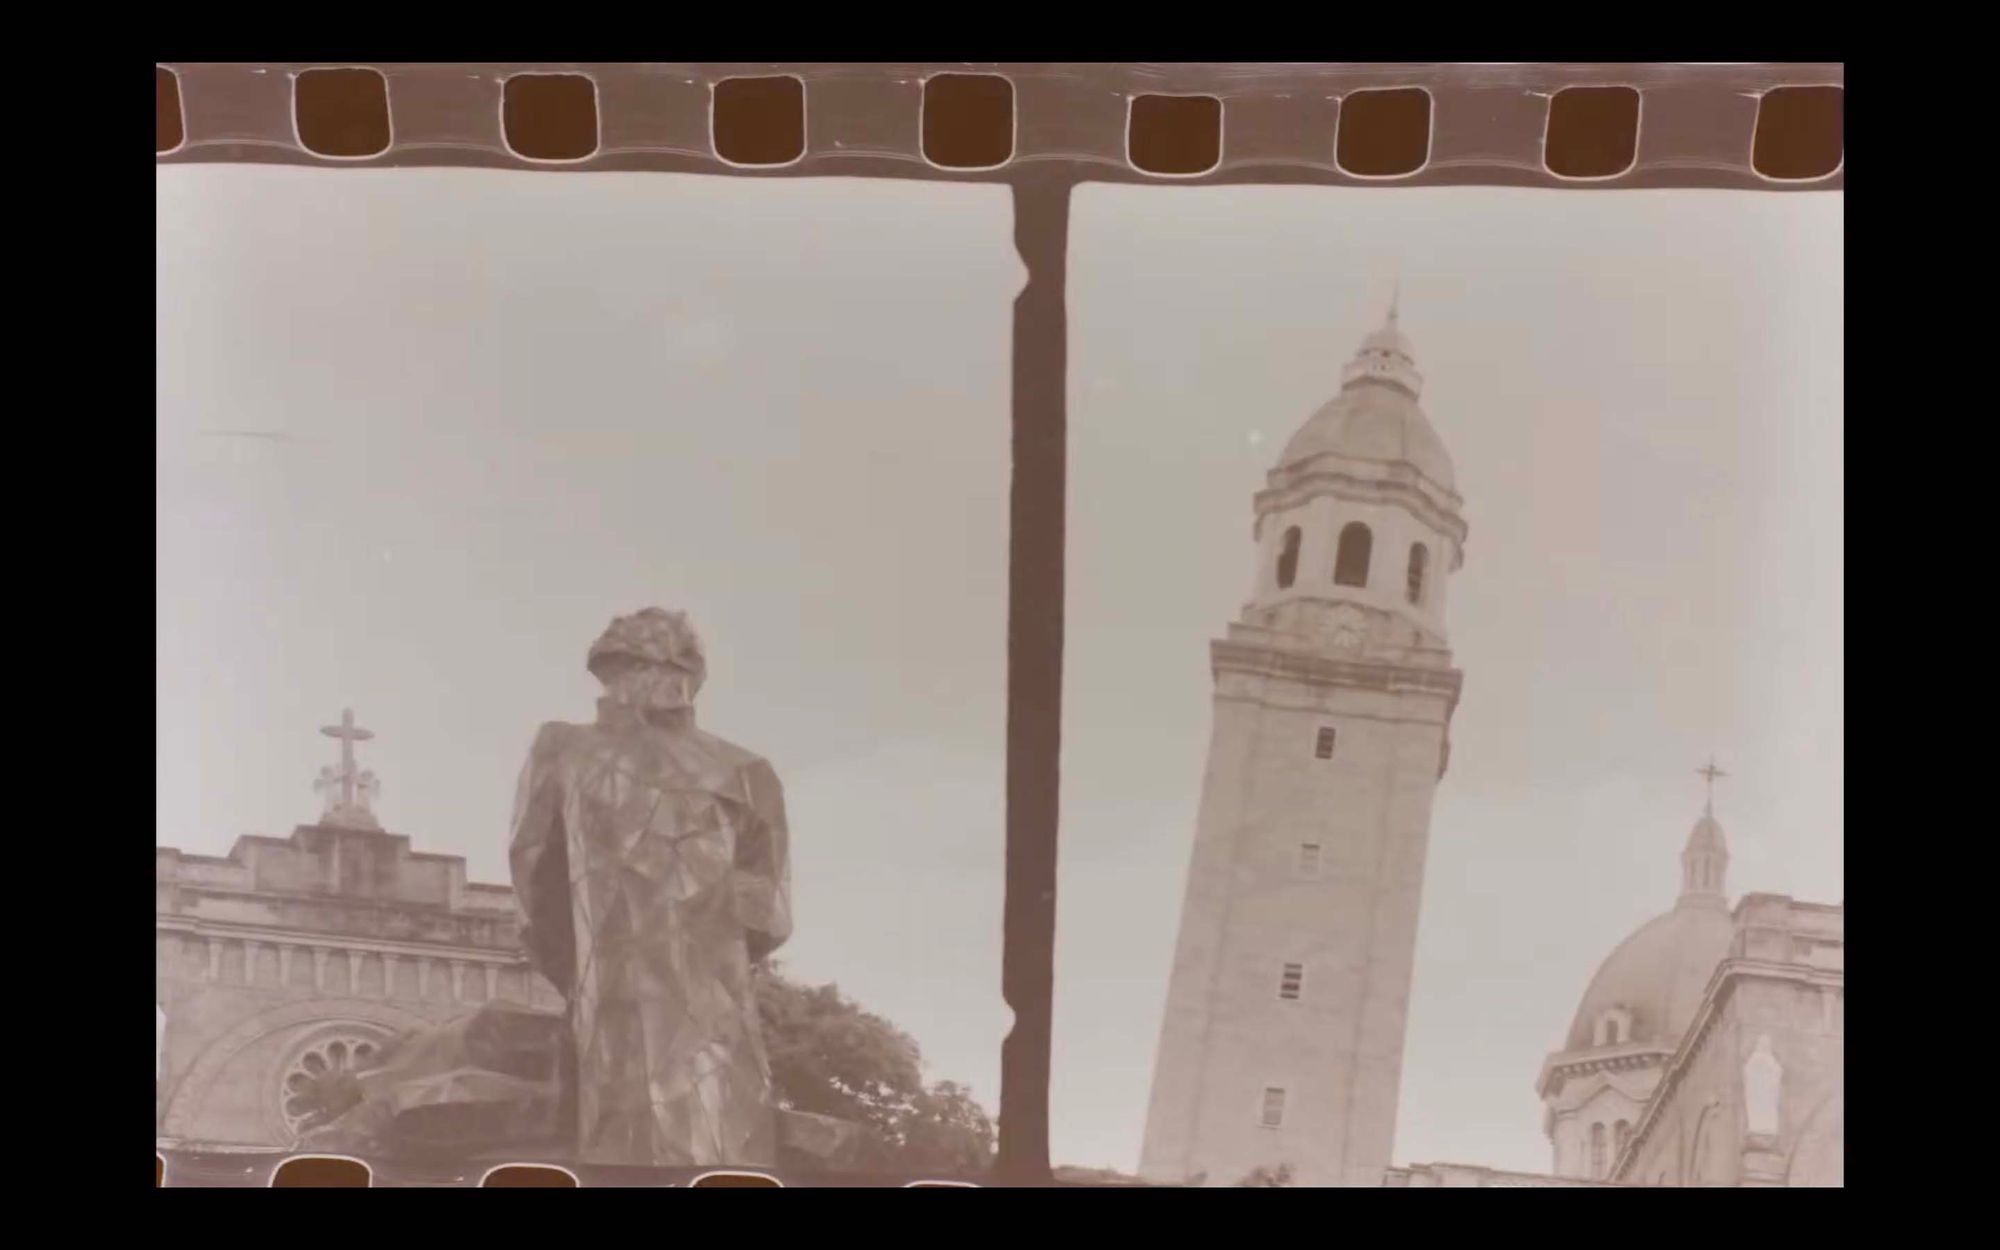 A sepia-toned dyptich of the Gomburza Monument and the Manila Cathedral.